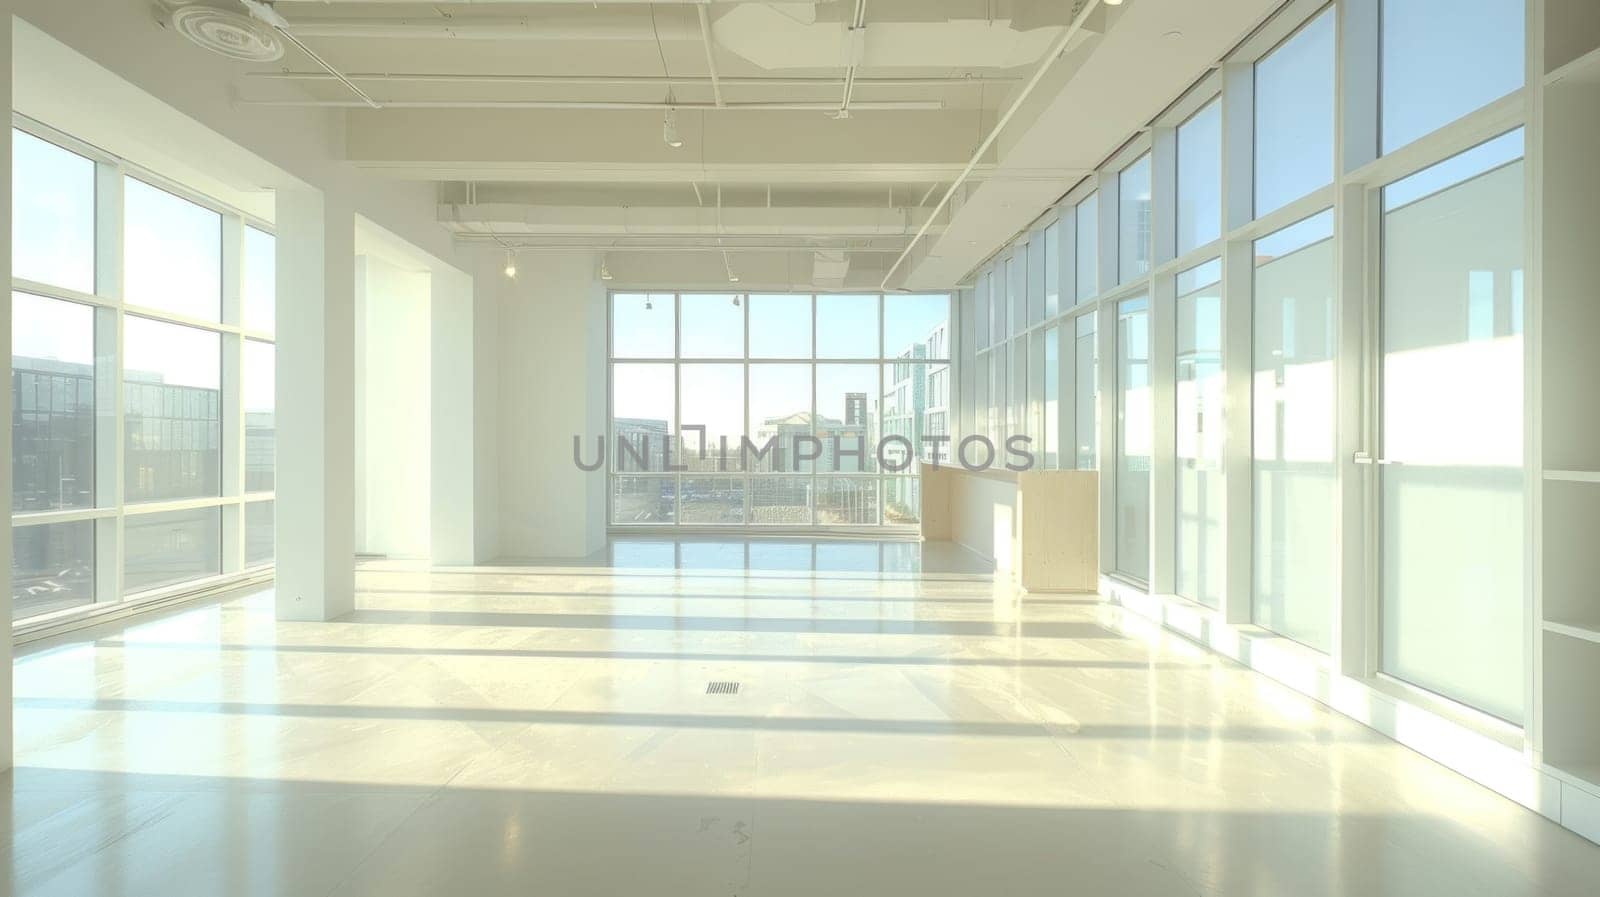 A large, empty room with a view of a city skyline.